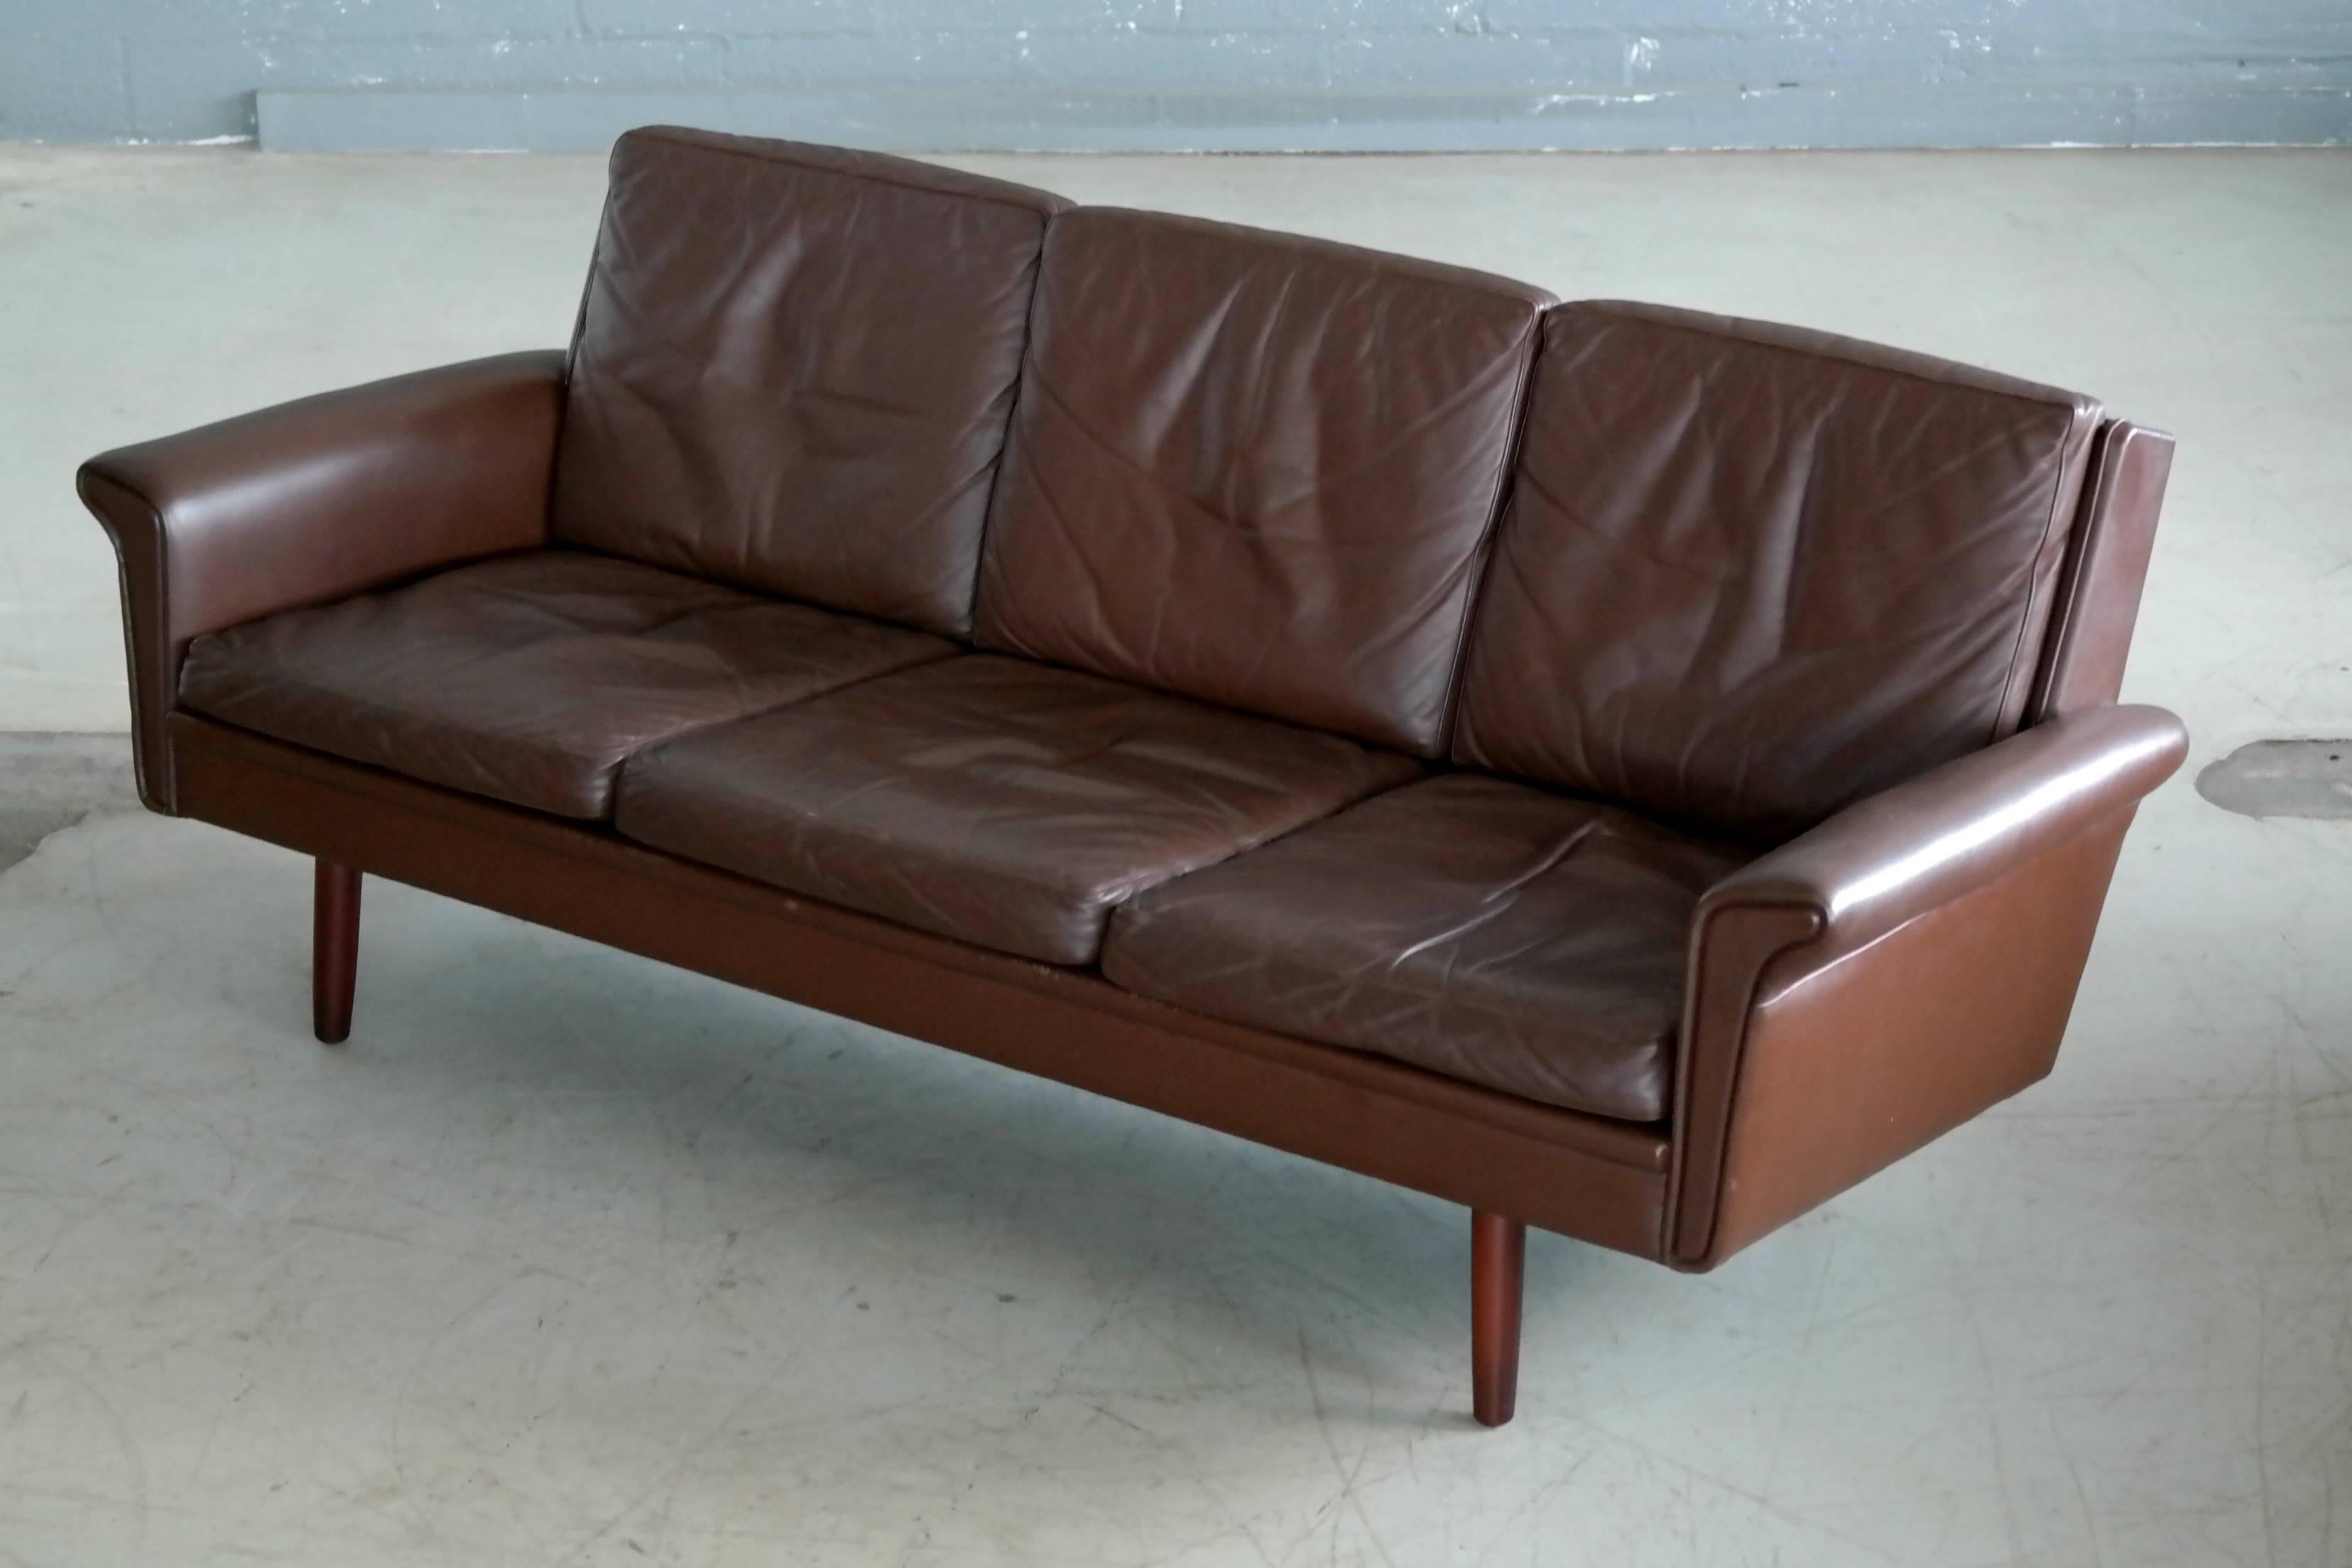 Mid-20th Century Classic Danish Midcentury Sofa in Chestnut Colored Leather by Georg Thams